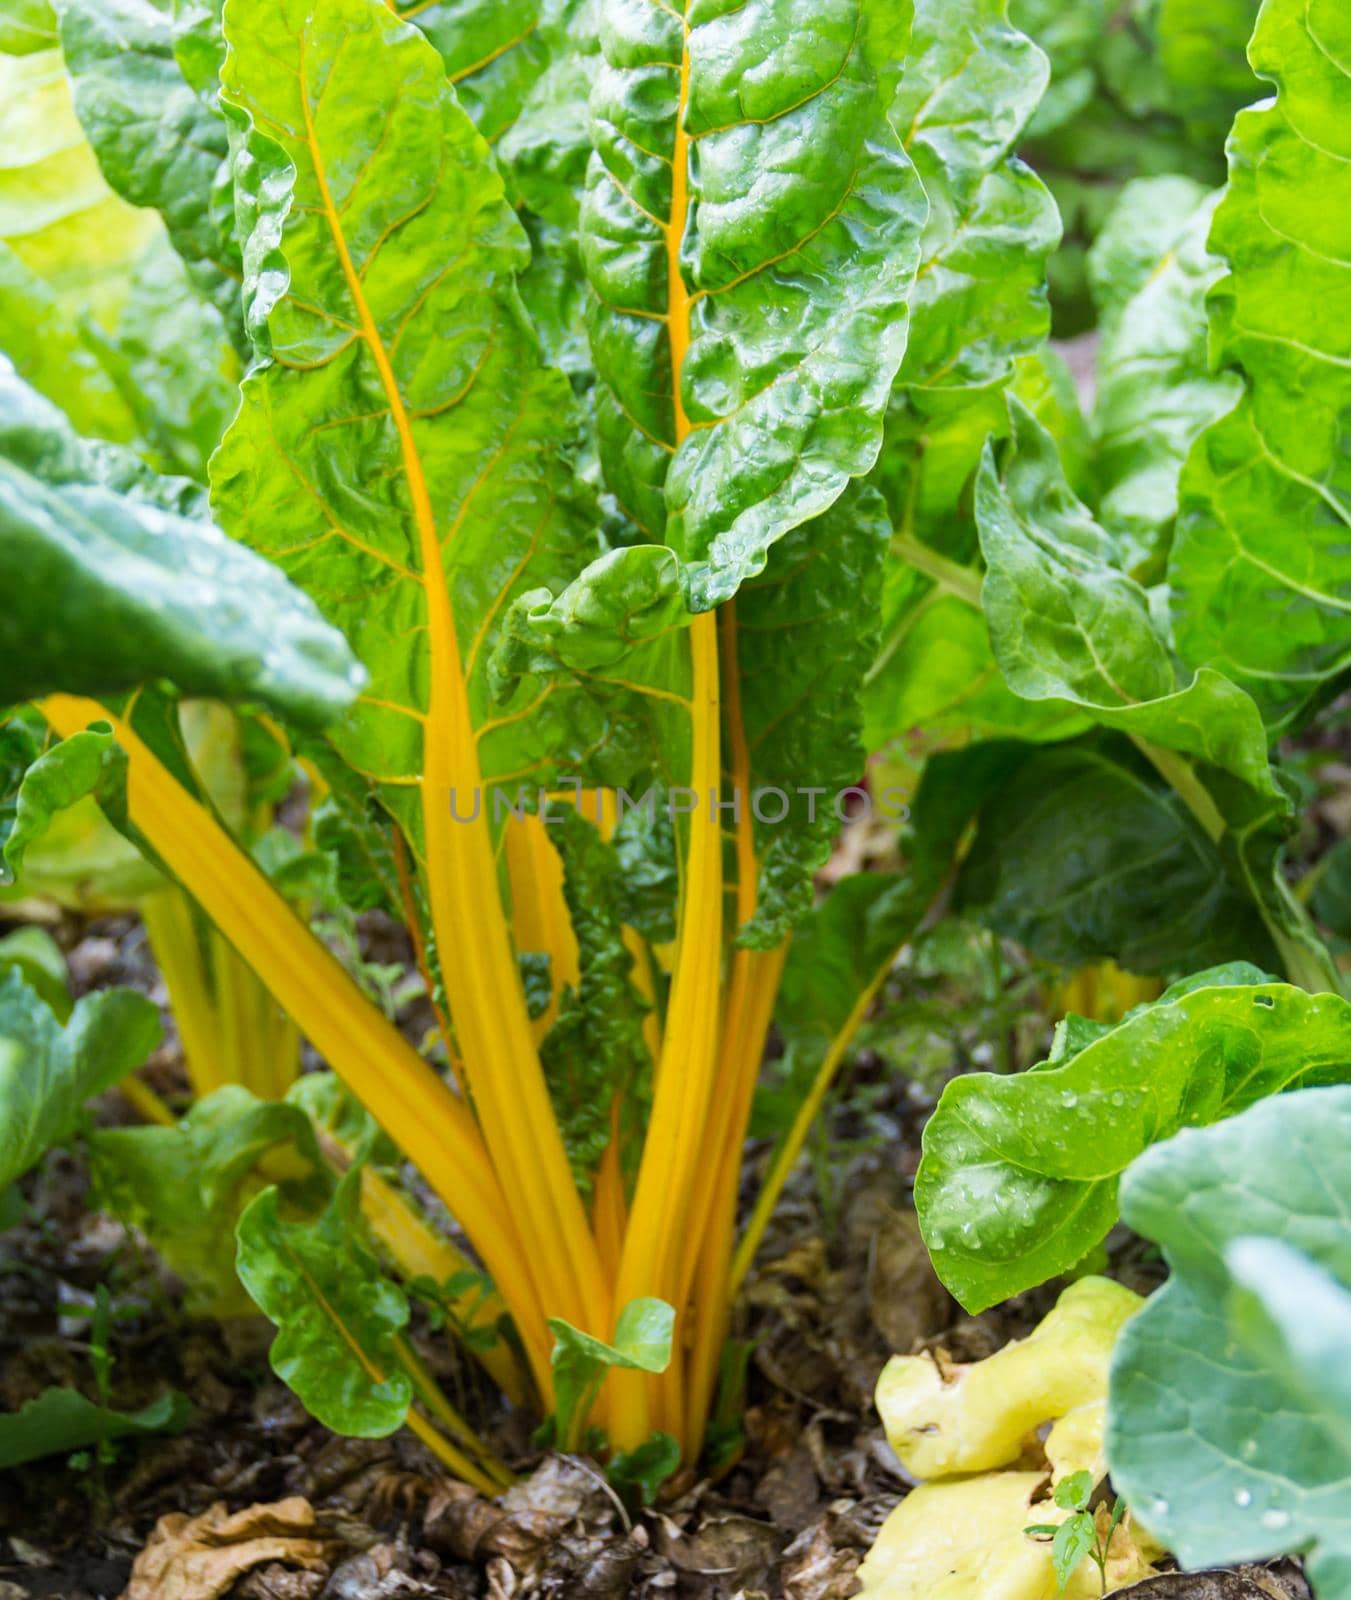 a yellow chard plant and green leaves in the vegetable garden in spring